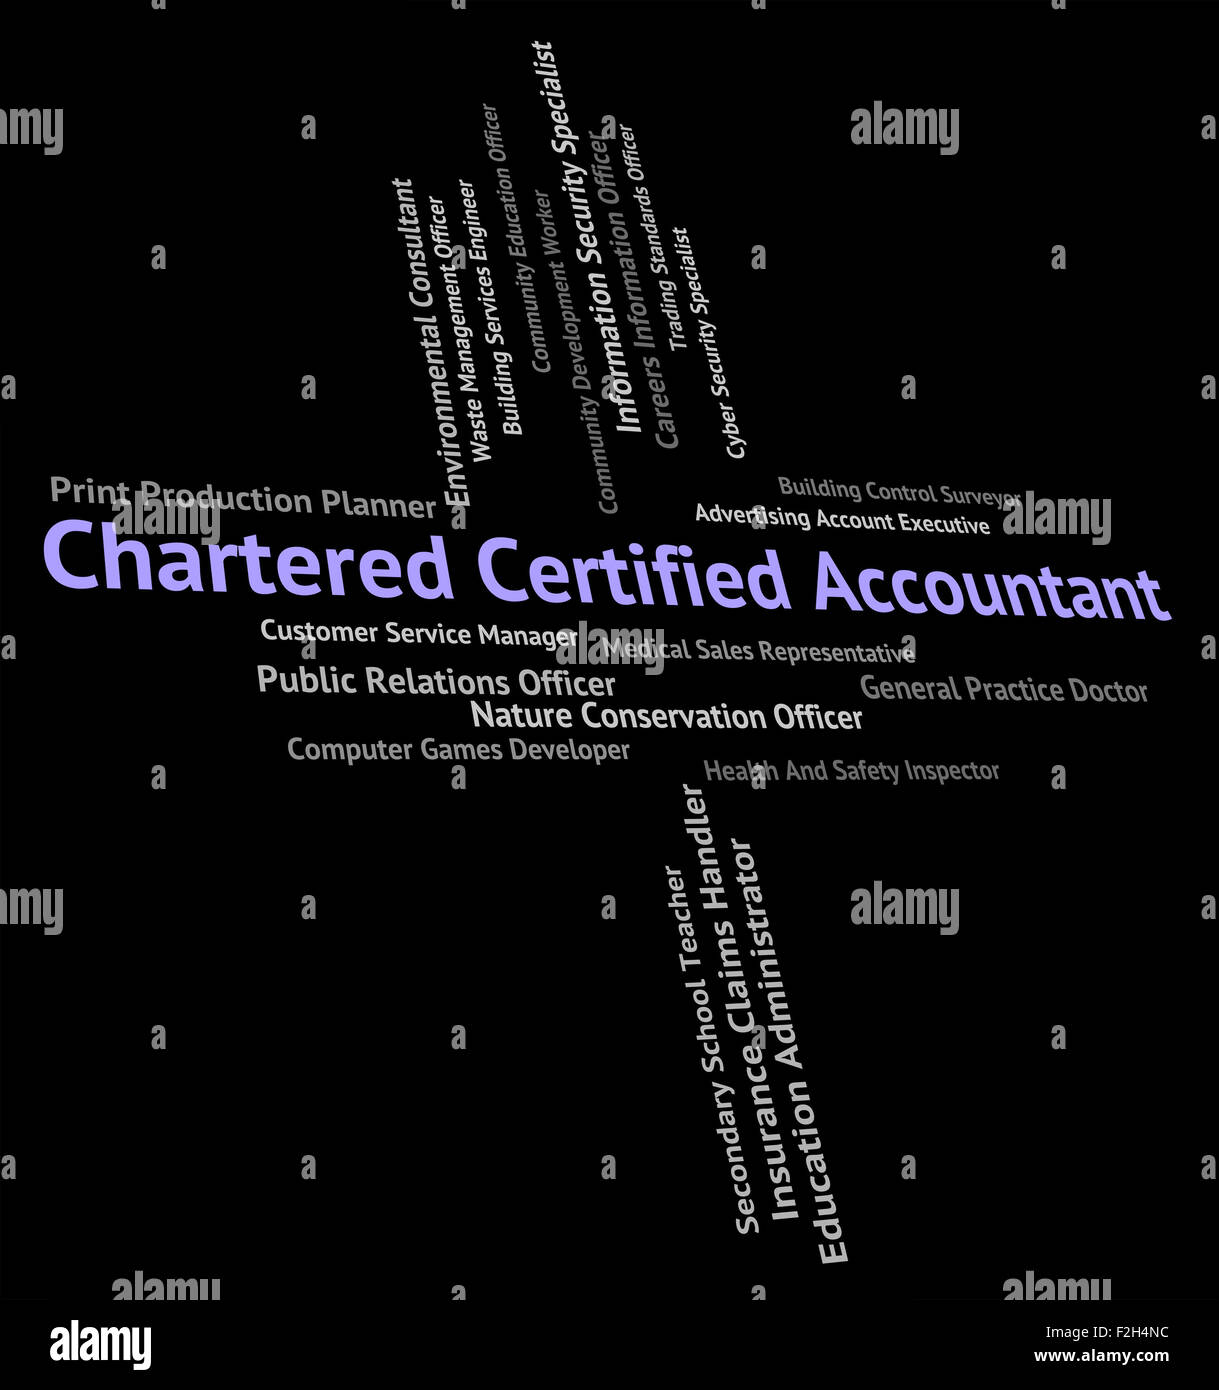 Chartered Accountant Pictures  Download Free Images on Unsplash